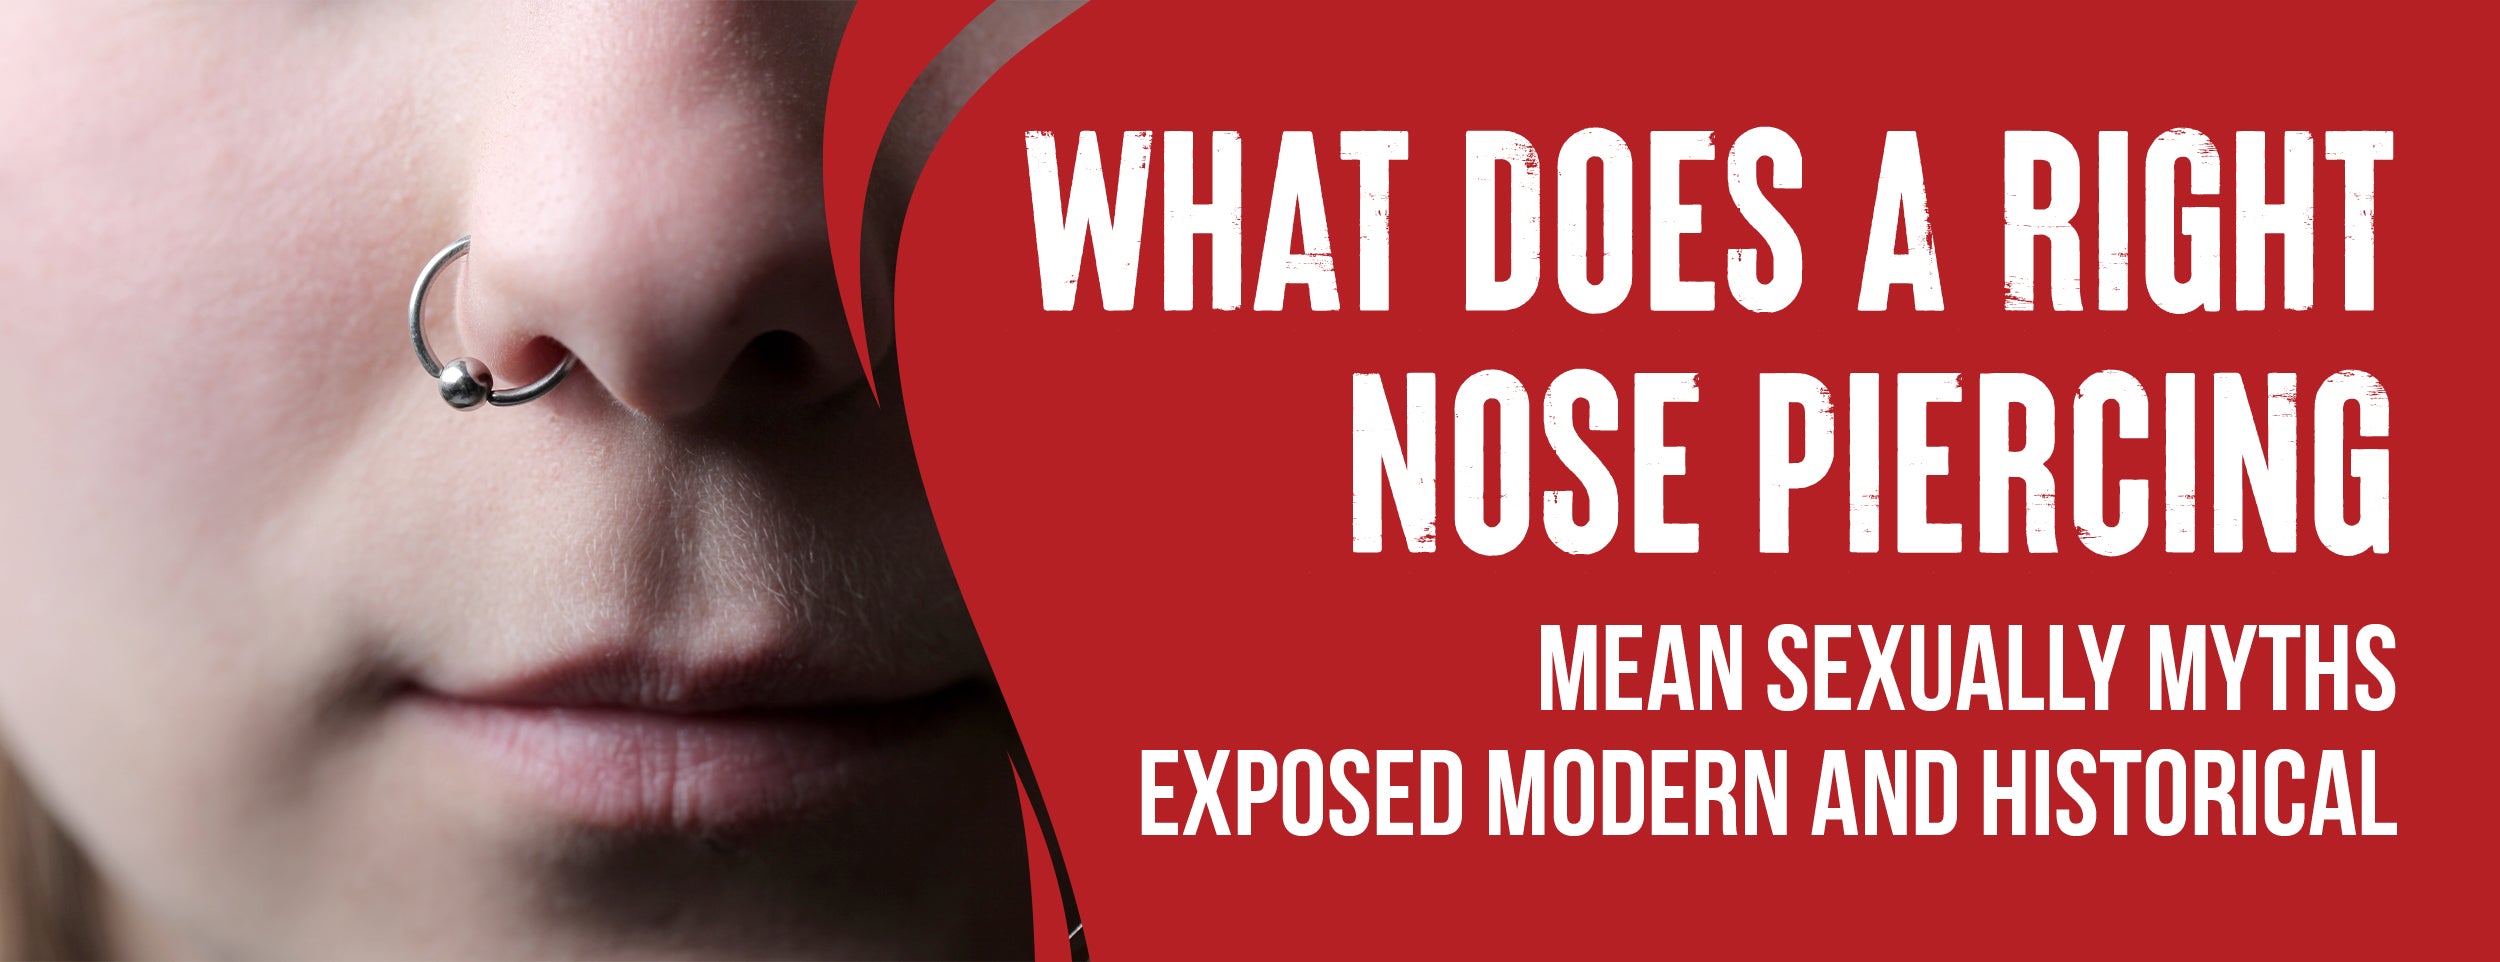 Modern and Historical Views of Right Nose Piercings & Exposing Myths